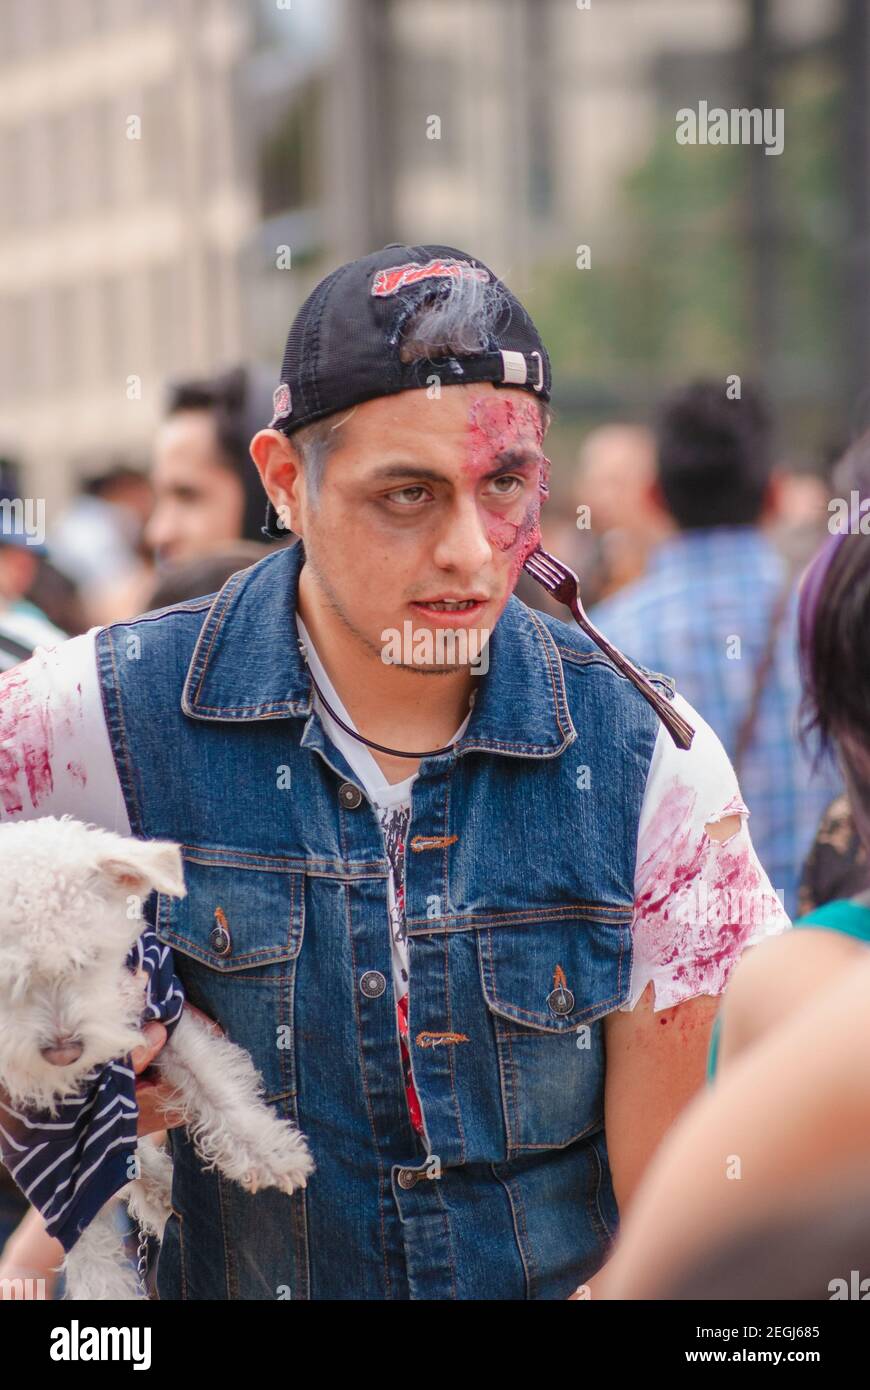 The zombie march takes place, a family event that encourages non-discrimination and tolerance. Stock Photo